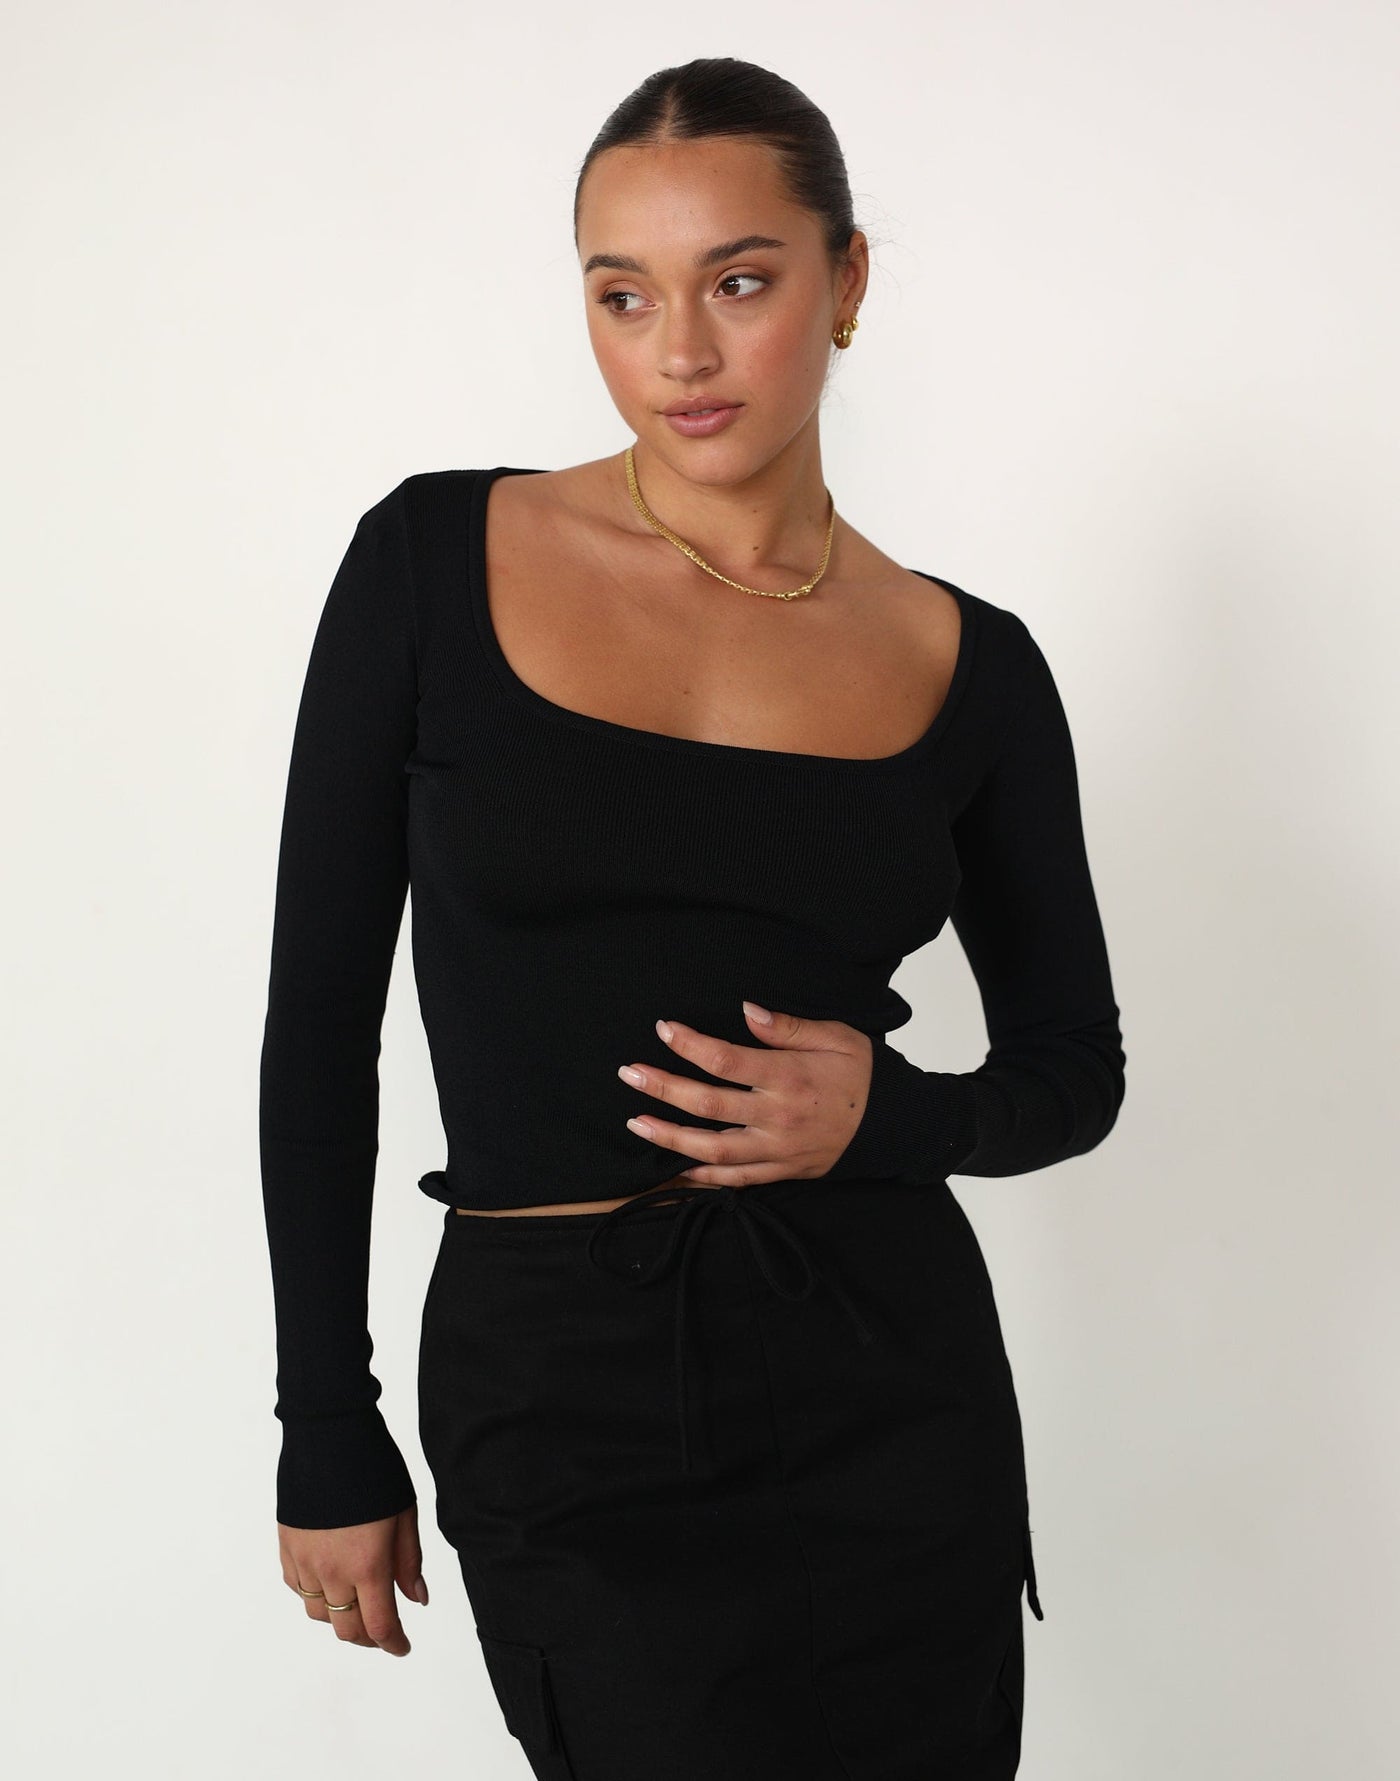 Ali Long Sleeve Top (Black) - Ribbed Rounded Square Neck Top - Women's Tops - Charcoal Clothing